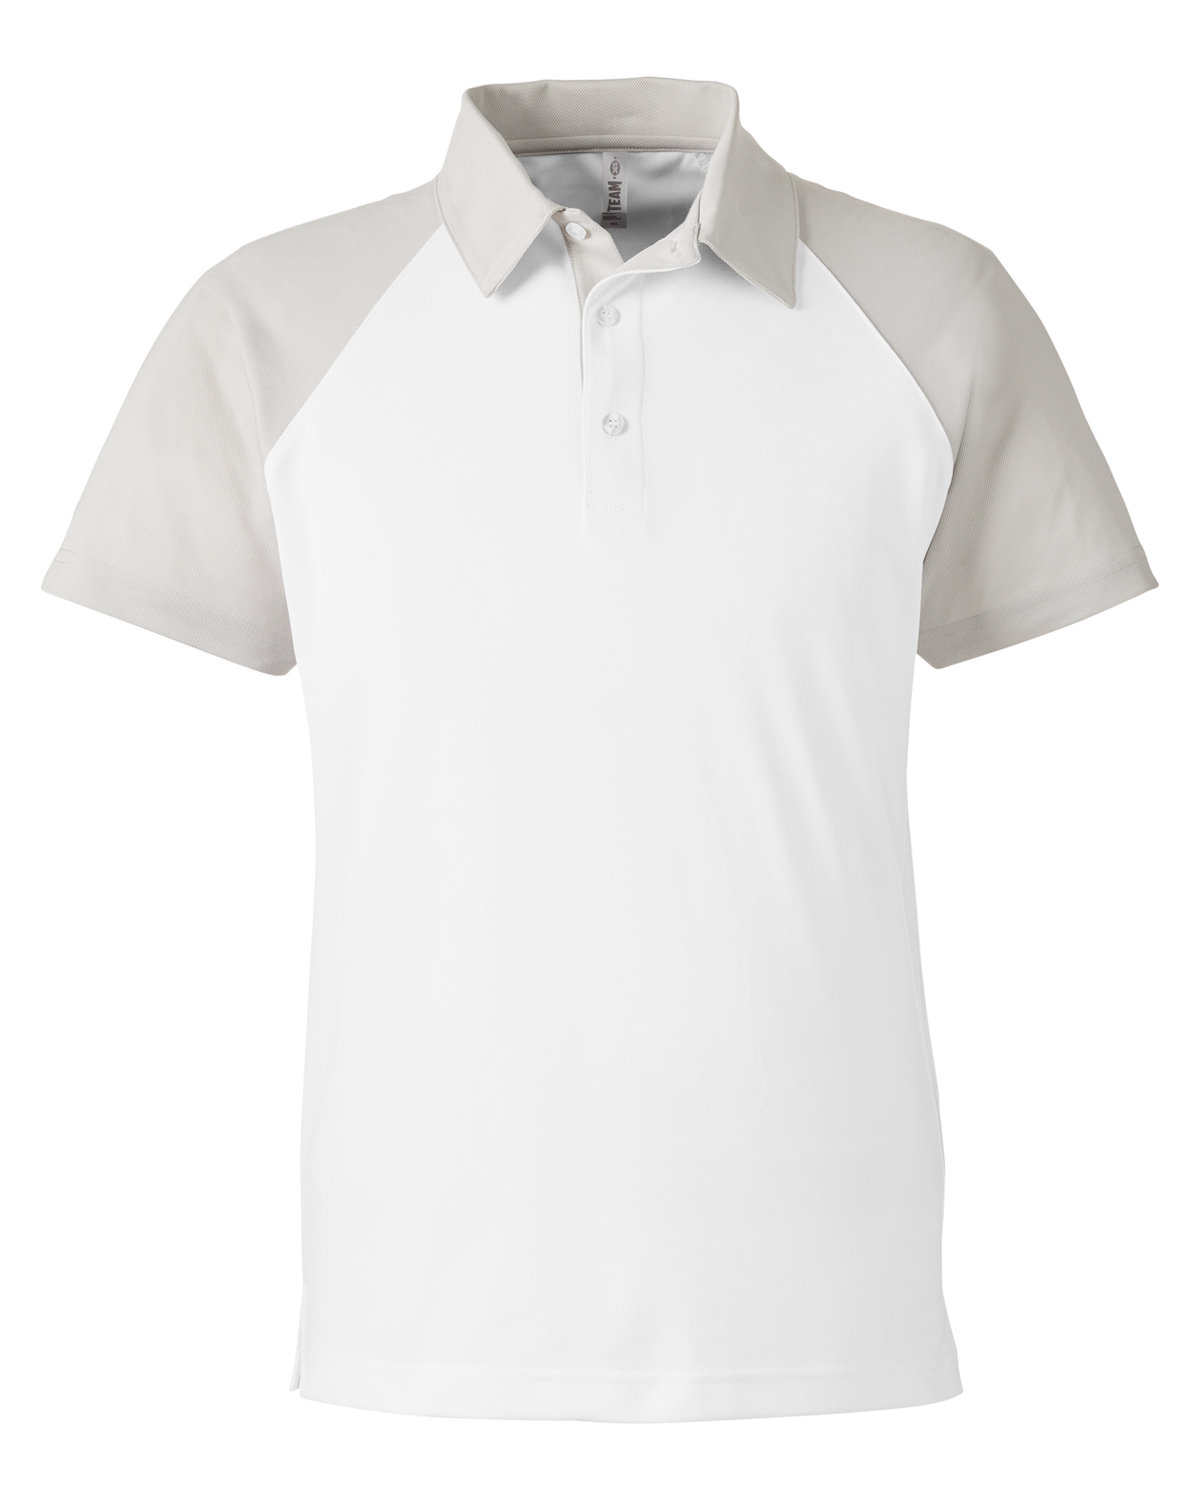 Picture of Team 365 Men's Command Snag-Protenction Colorblock Polo